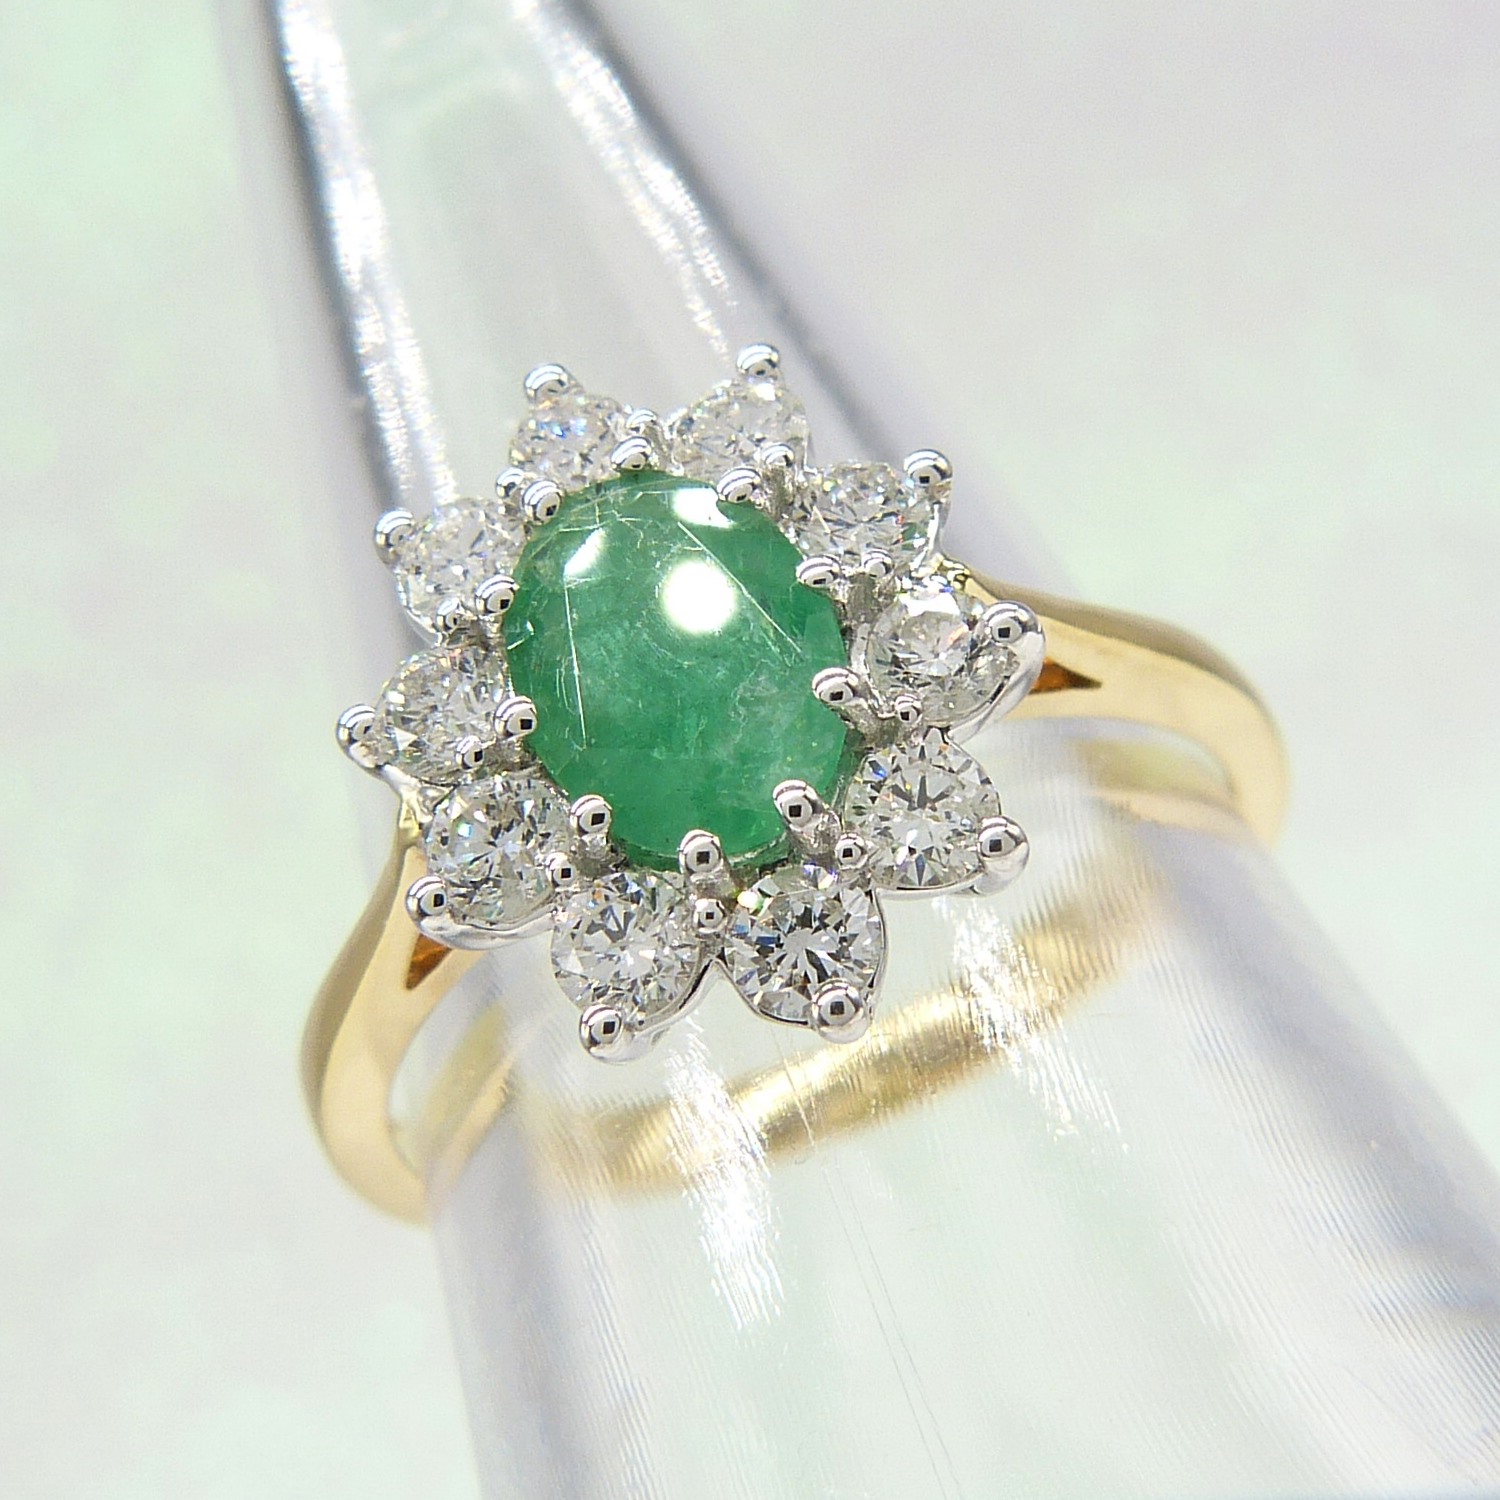 A certificated 18ct yellow Gold oval Emerald gemstone and round brilliant-cut Diamond ring - Image 9 of 10